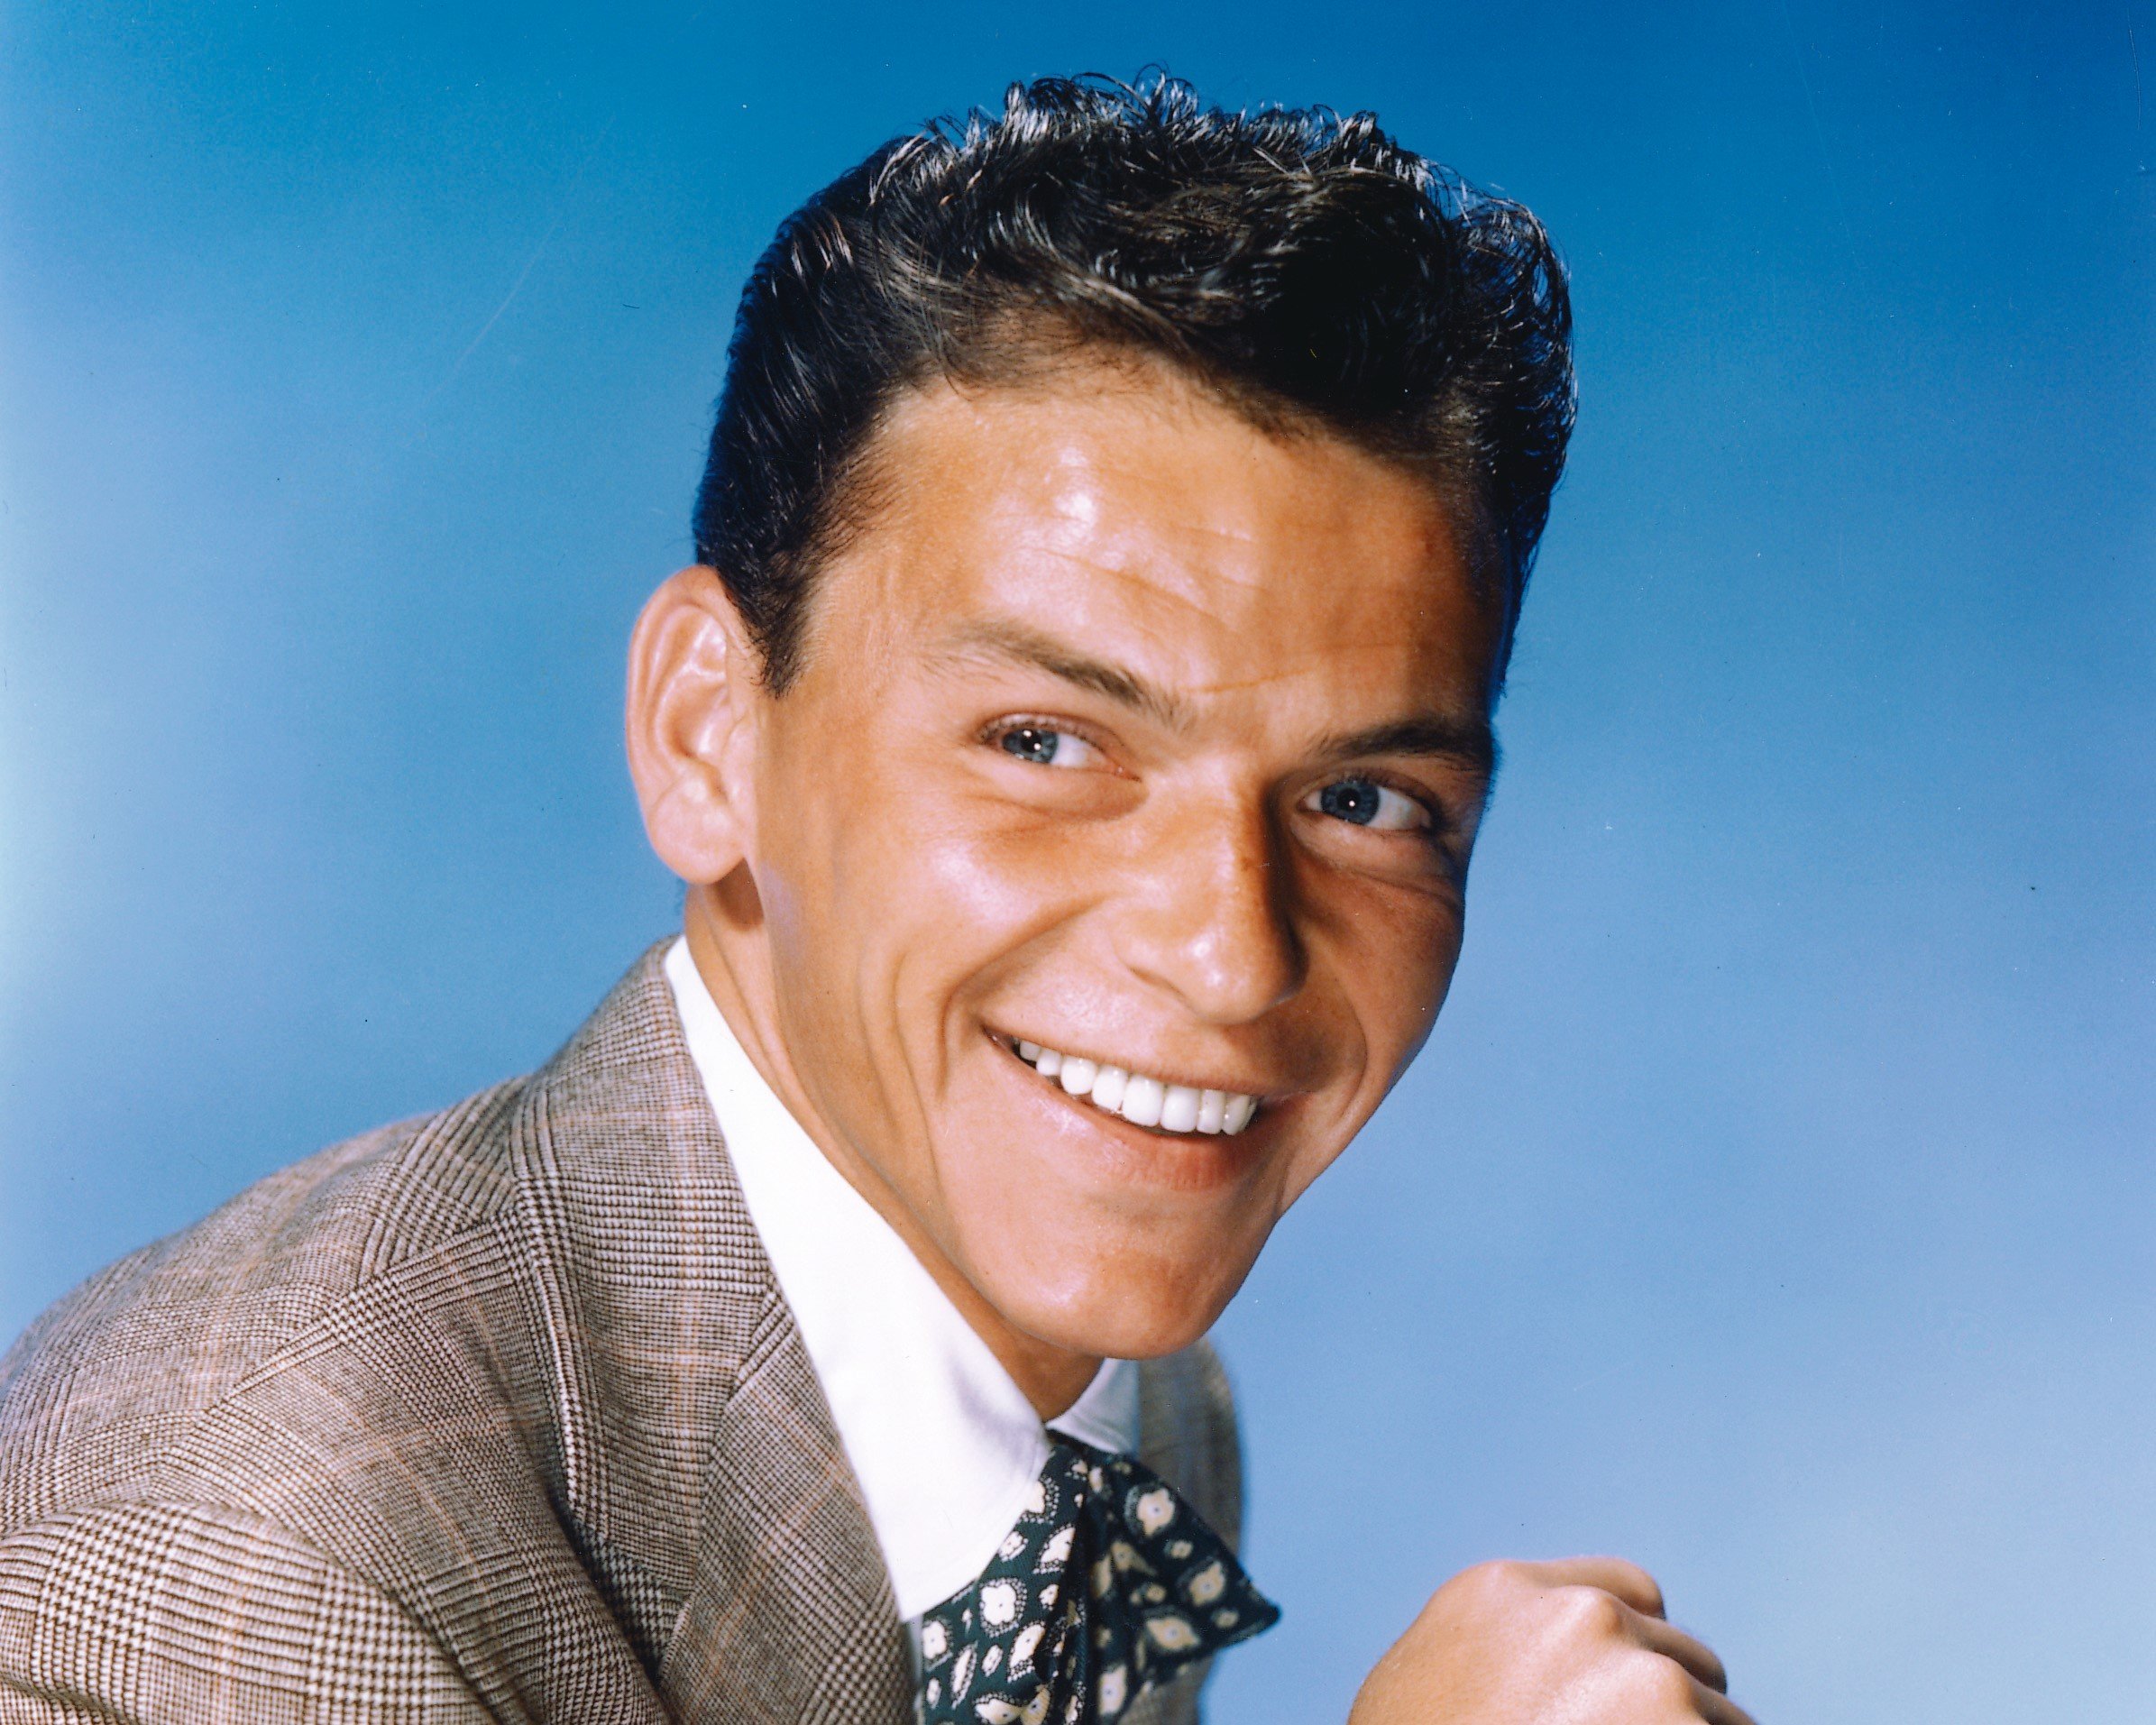 Frank Sinatra wears a suit and smiles against a blue background.